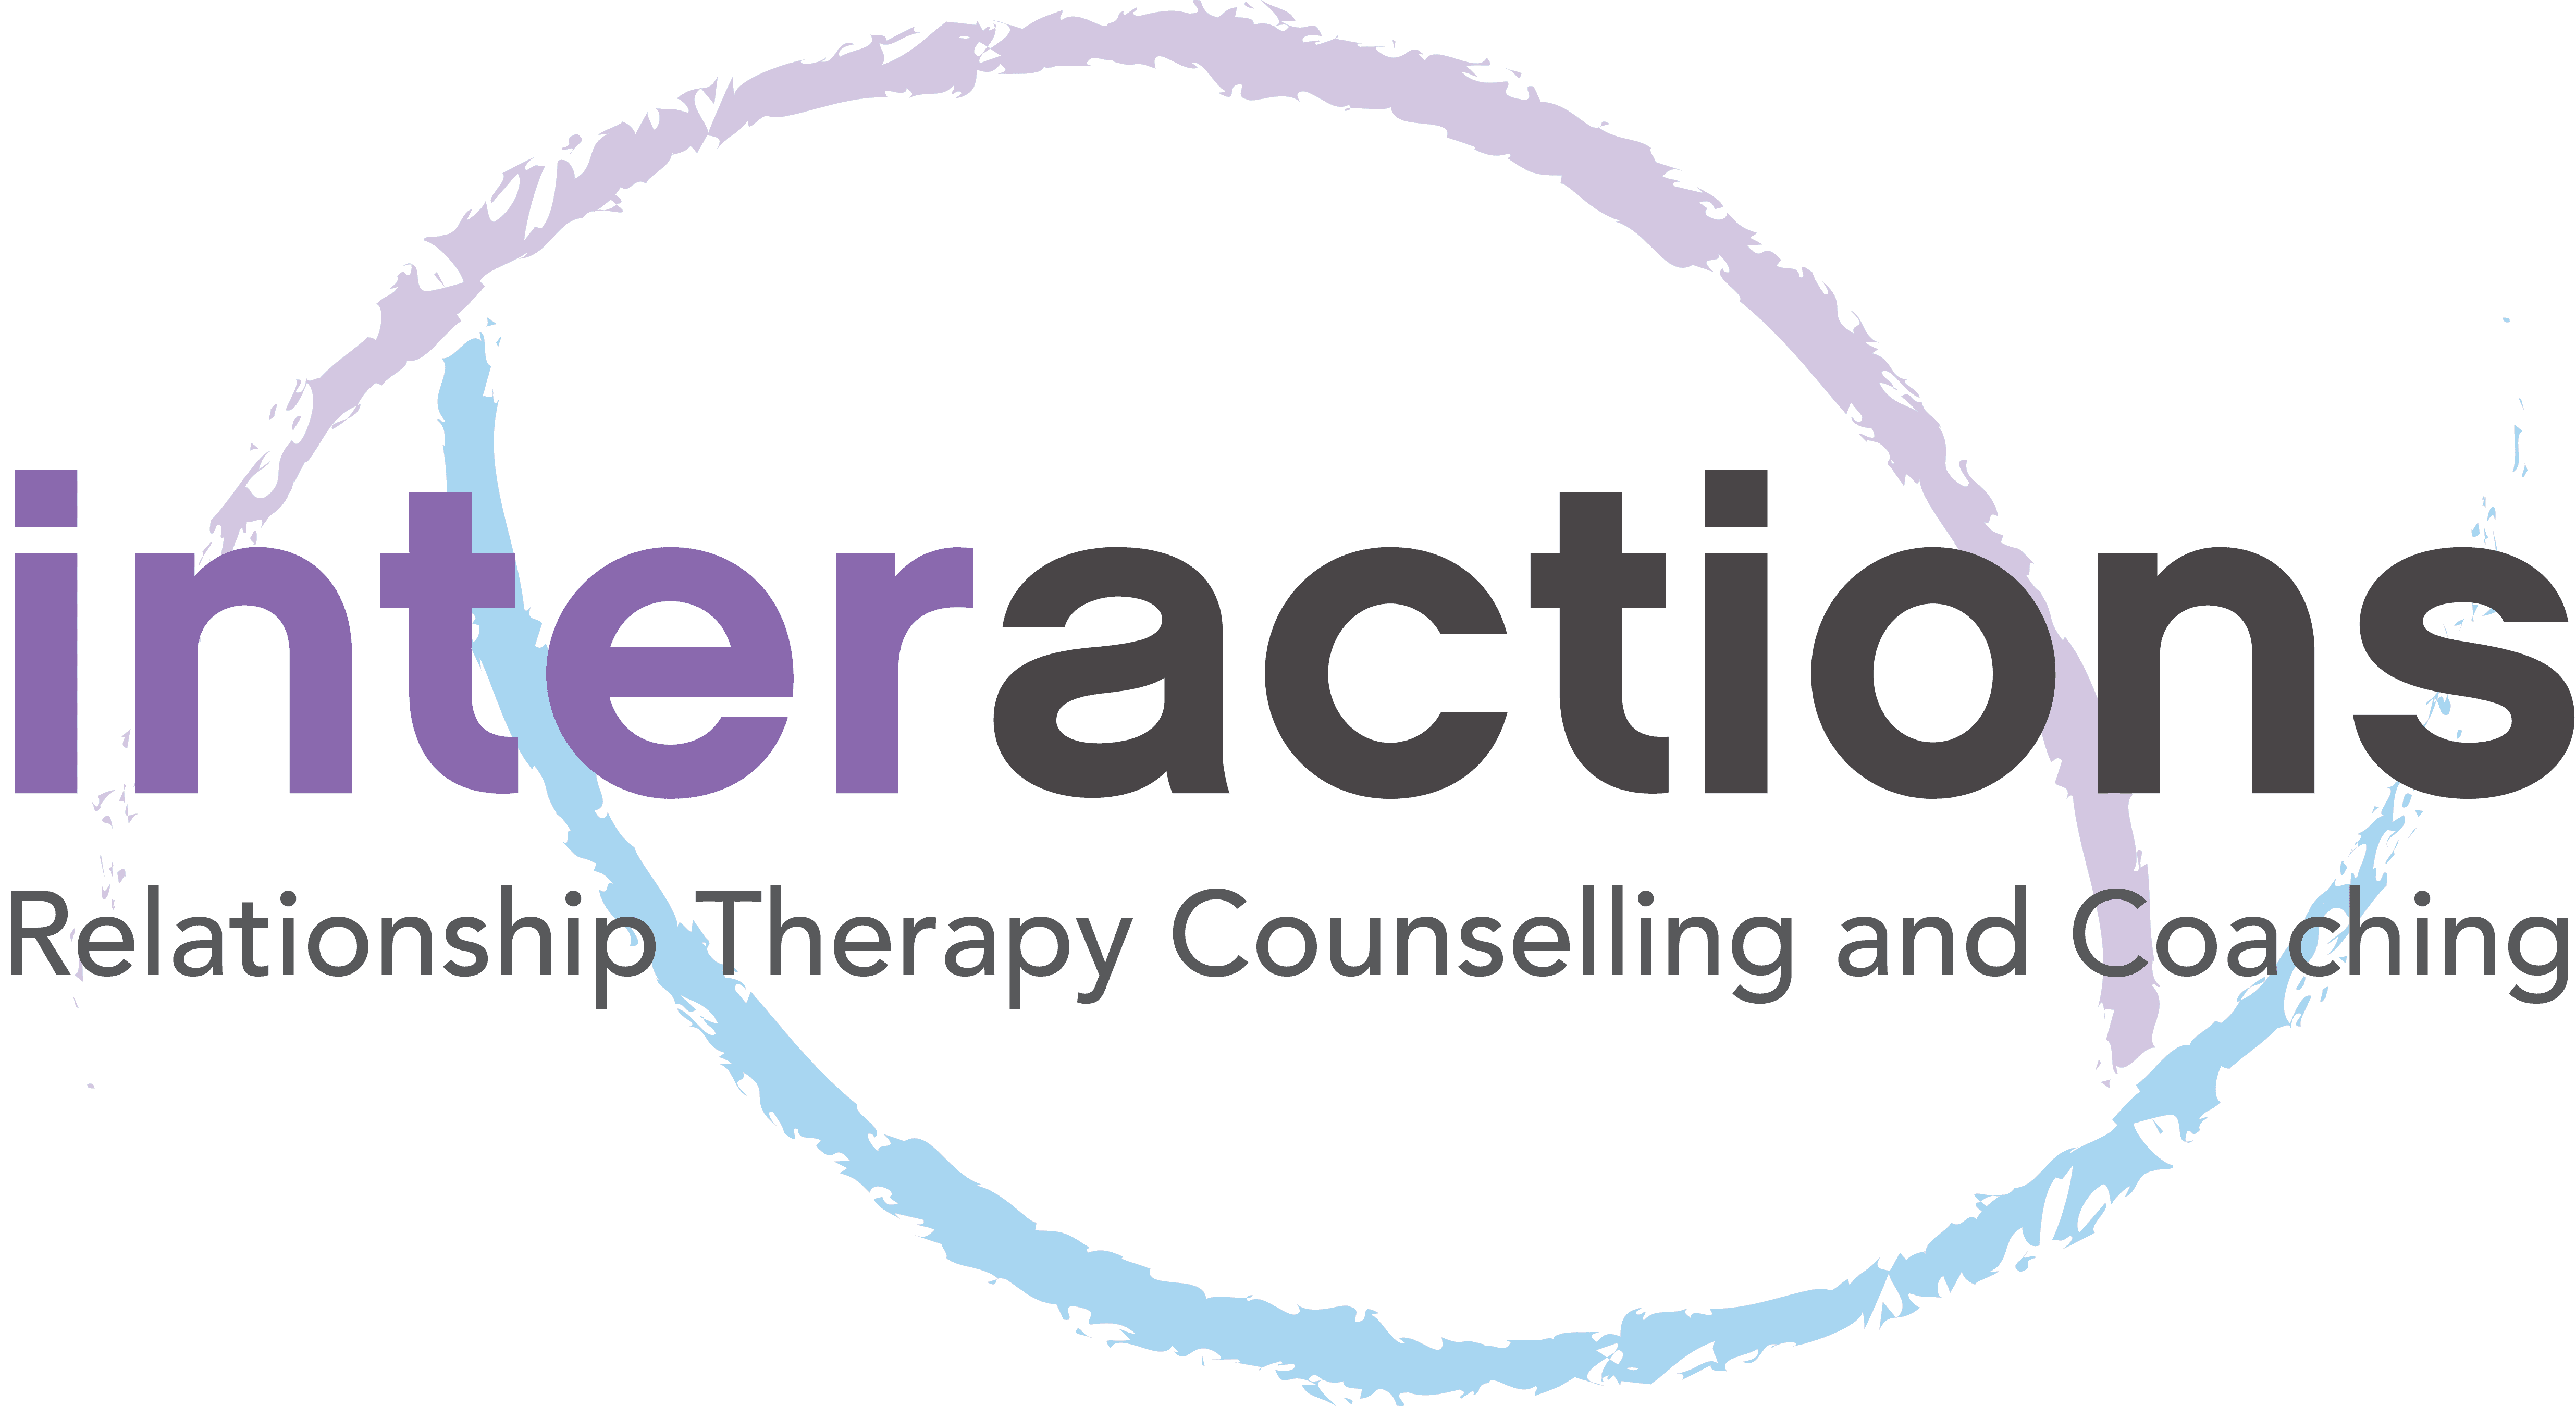 Interactions Therapy Counselling and Coaching logo